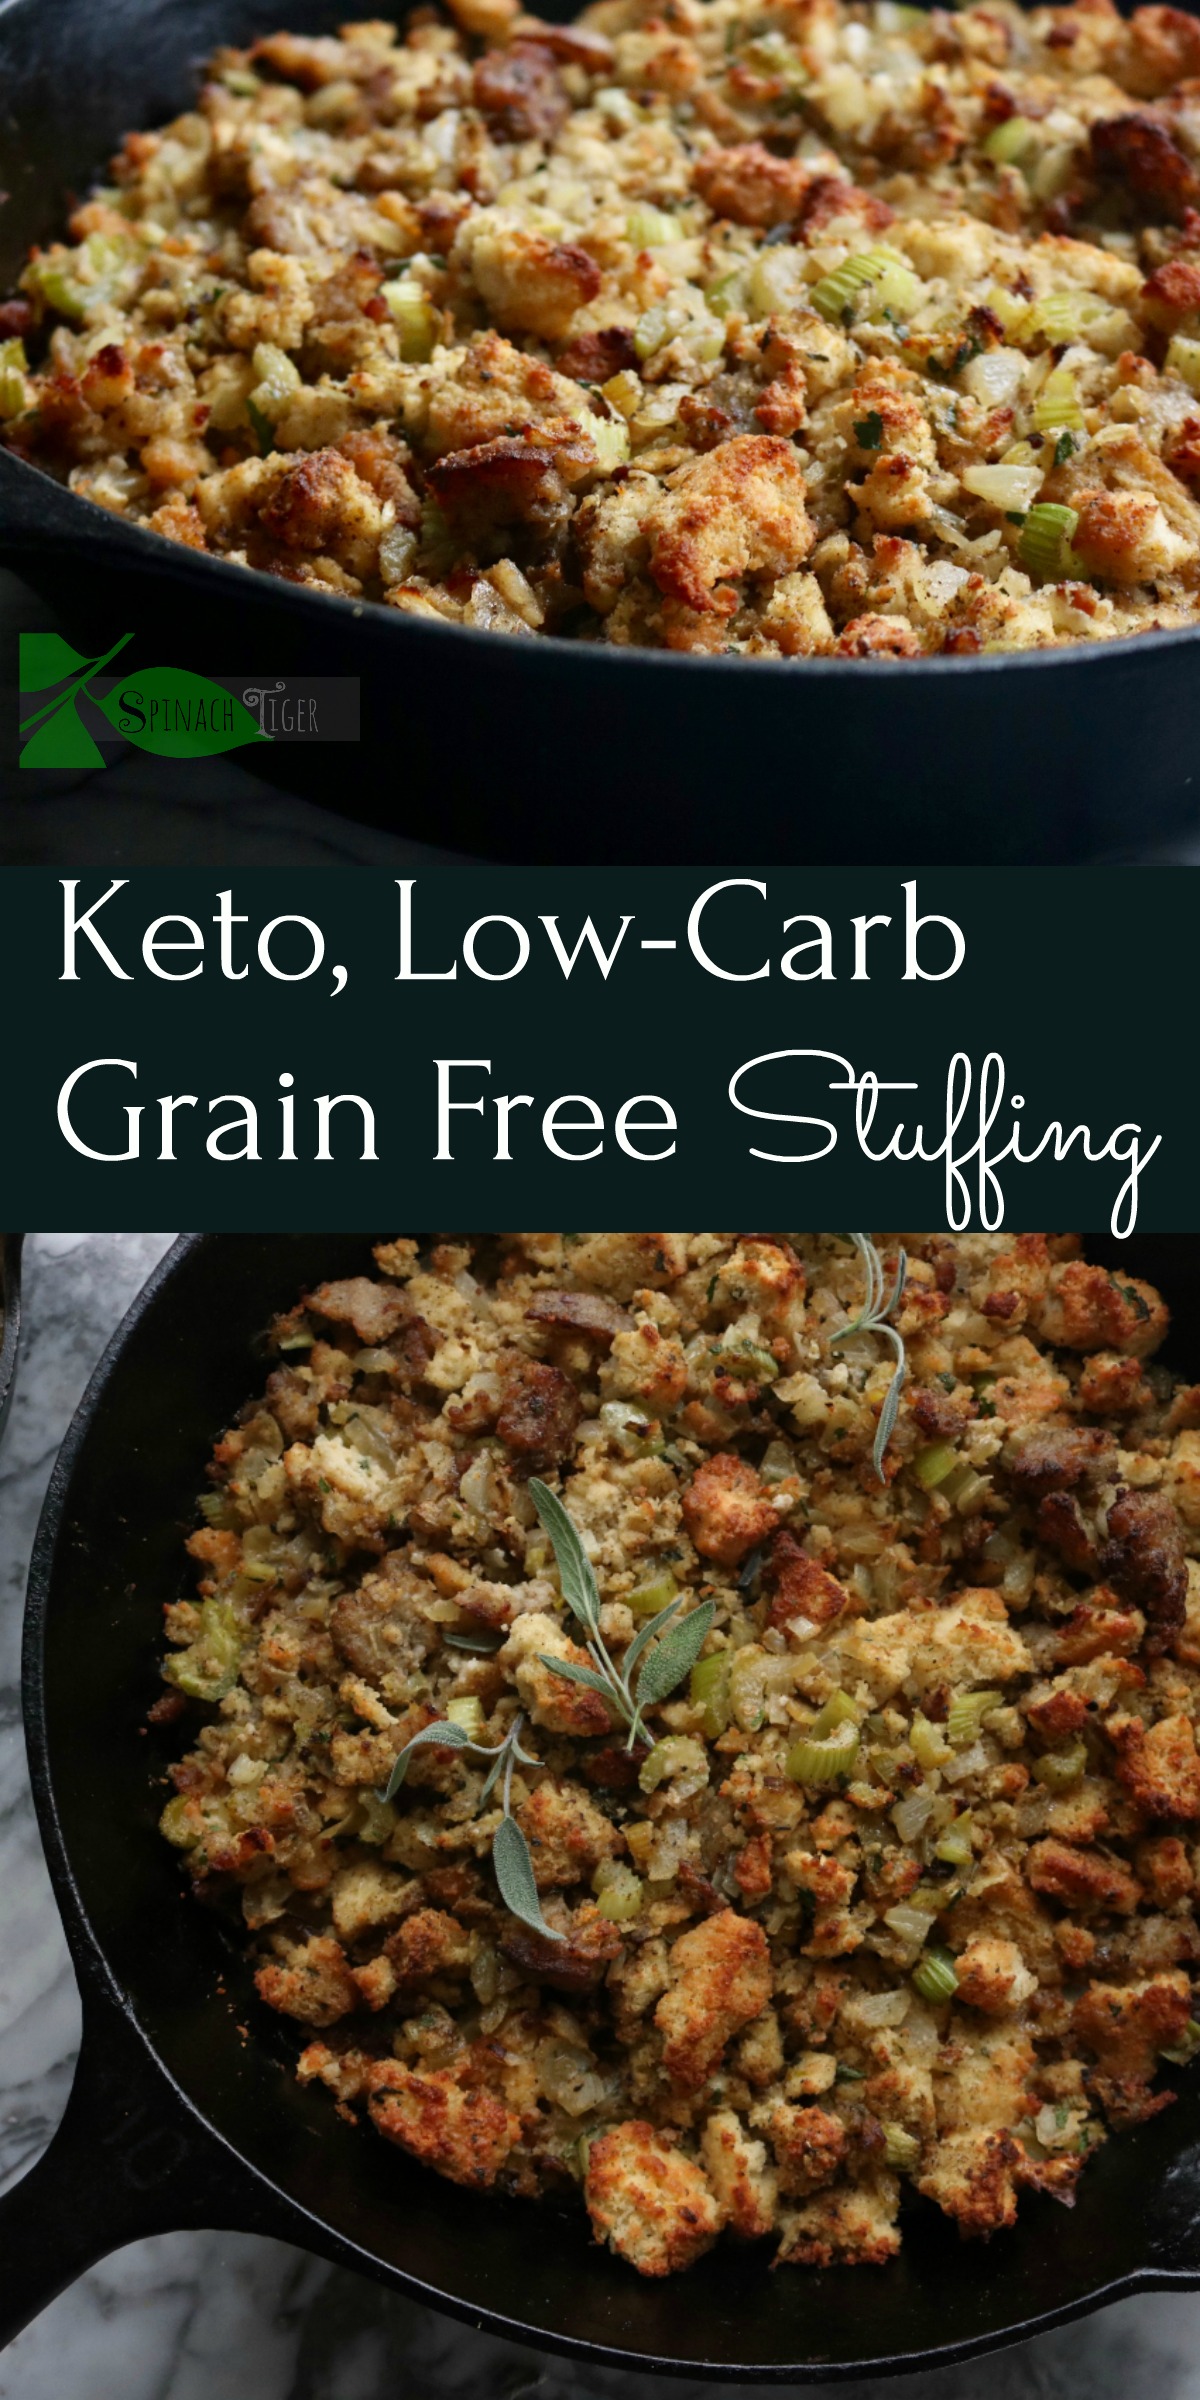 Easy Stuffing Recipes: Grain Free Stuffing 